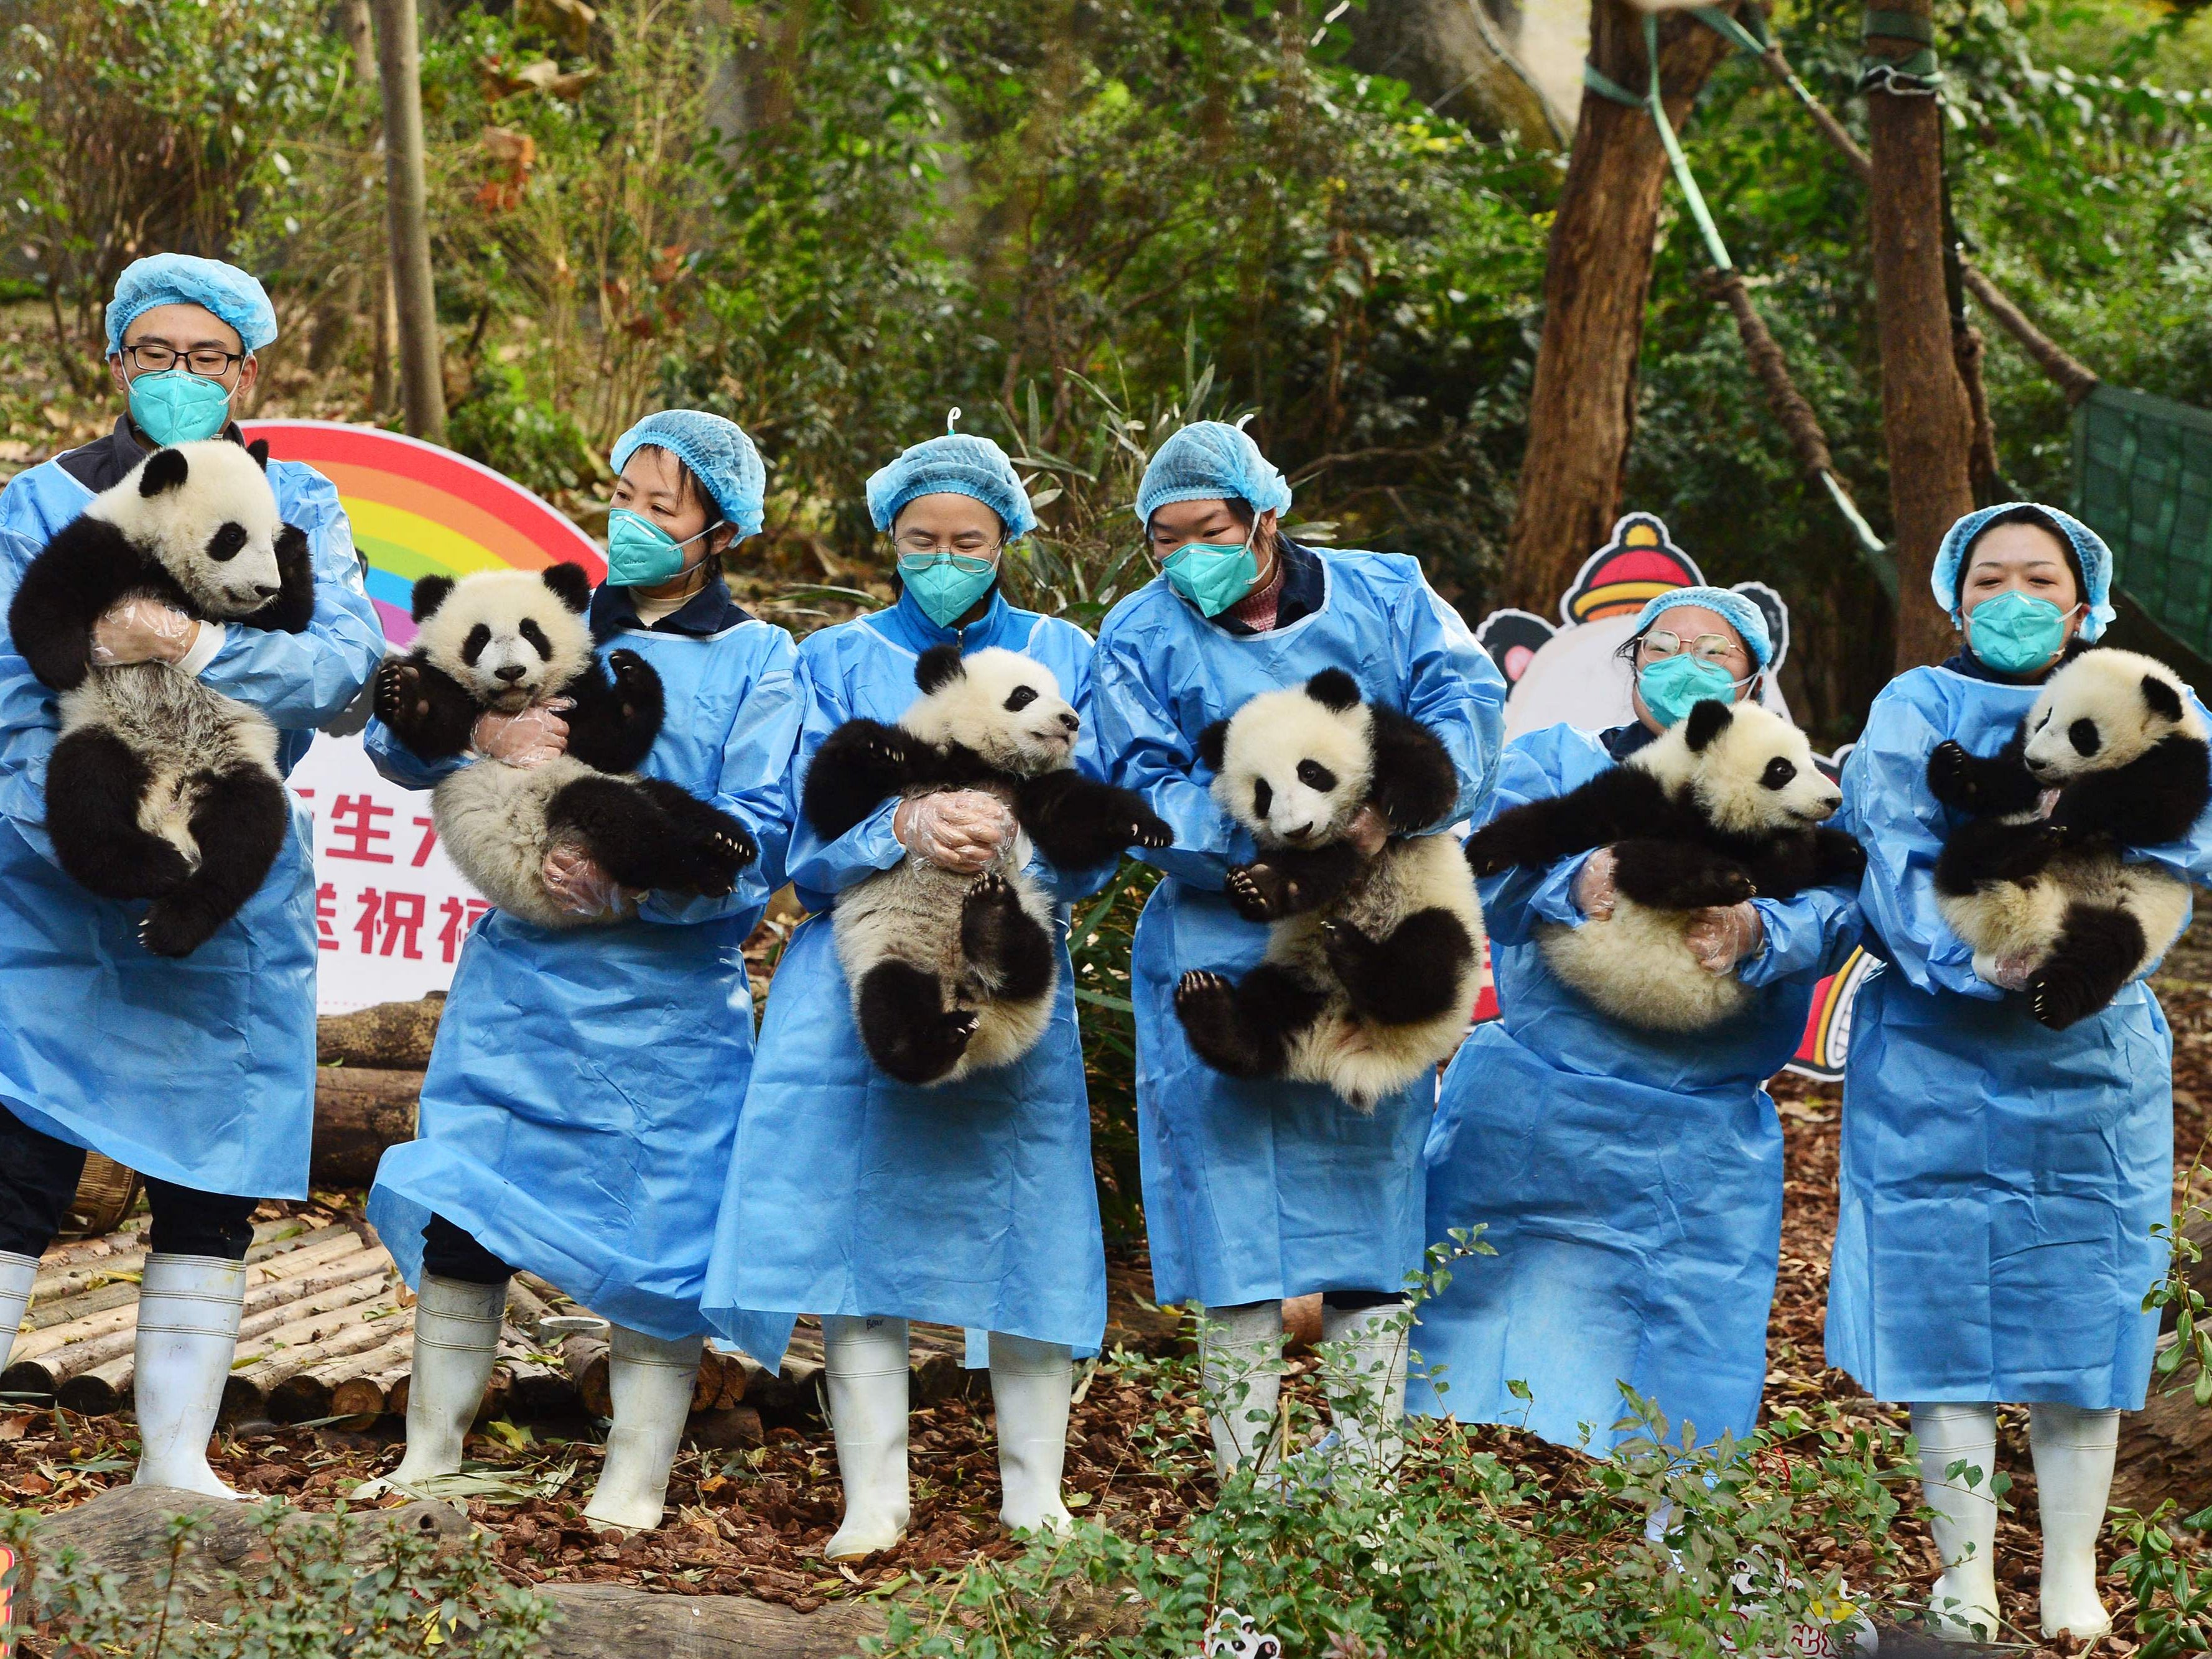 Panda keepers hold cubs while posing for photos ahead of the new year at the Chengdu Research Base of Giant Panda Breeding in Chengdu, China's southwestern Sichuan province